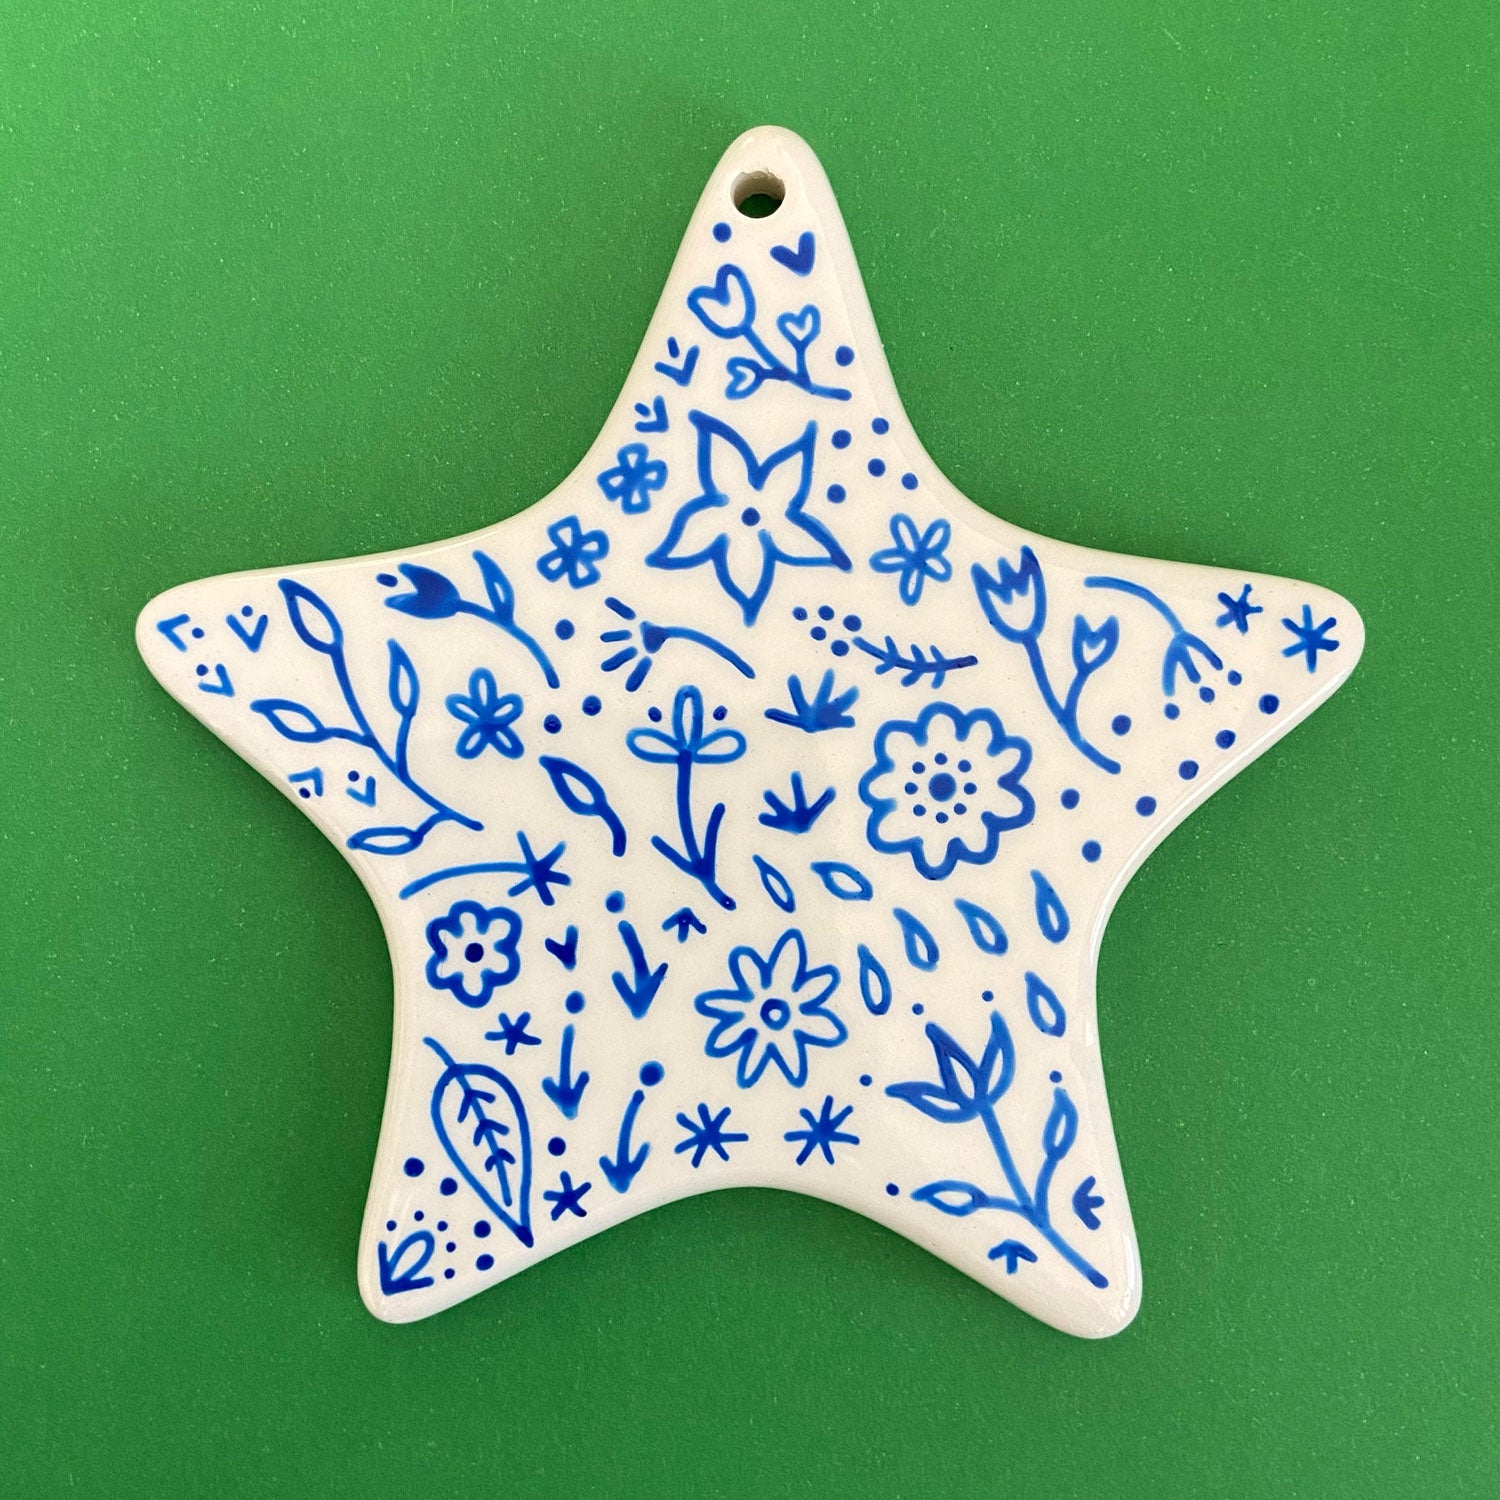 Blue Floral 2 - Hand Painted Star Ornament